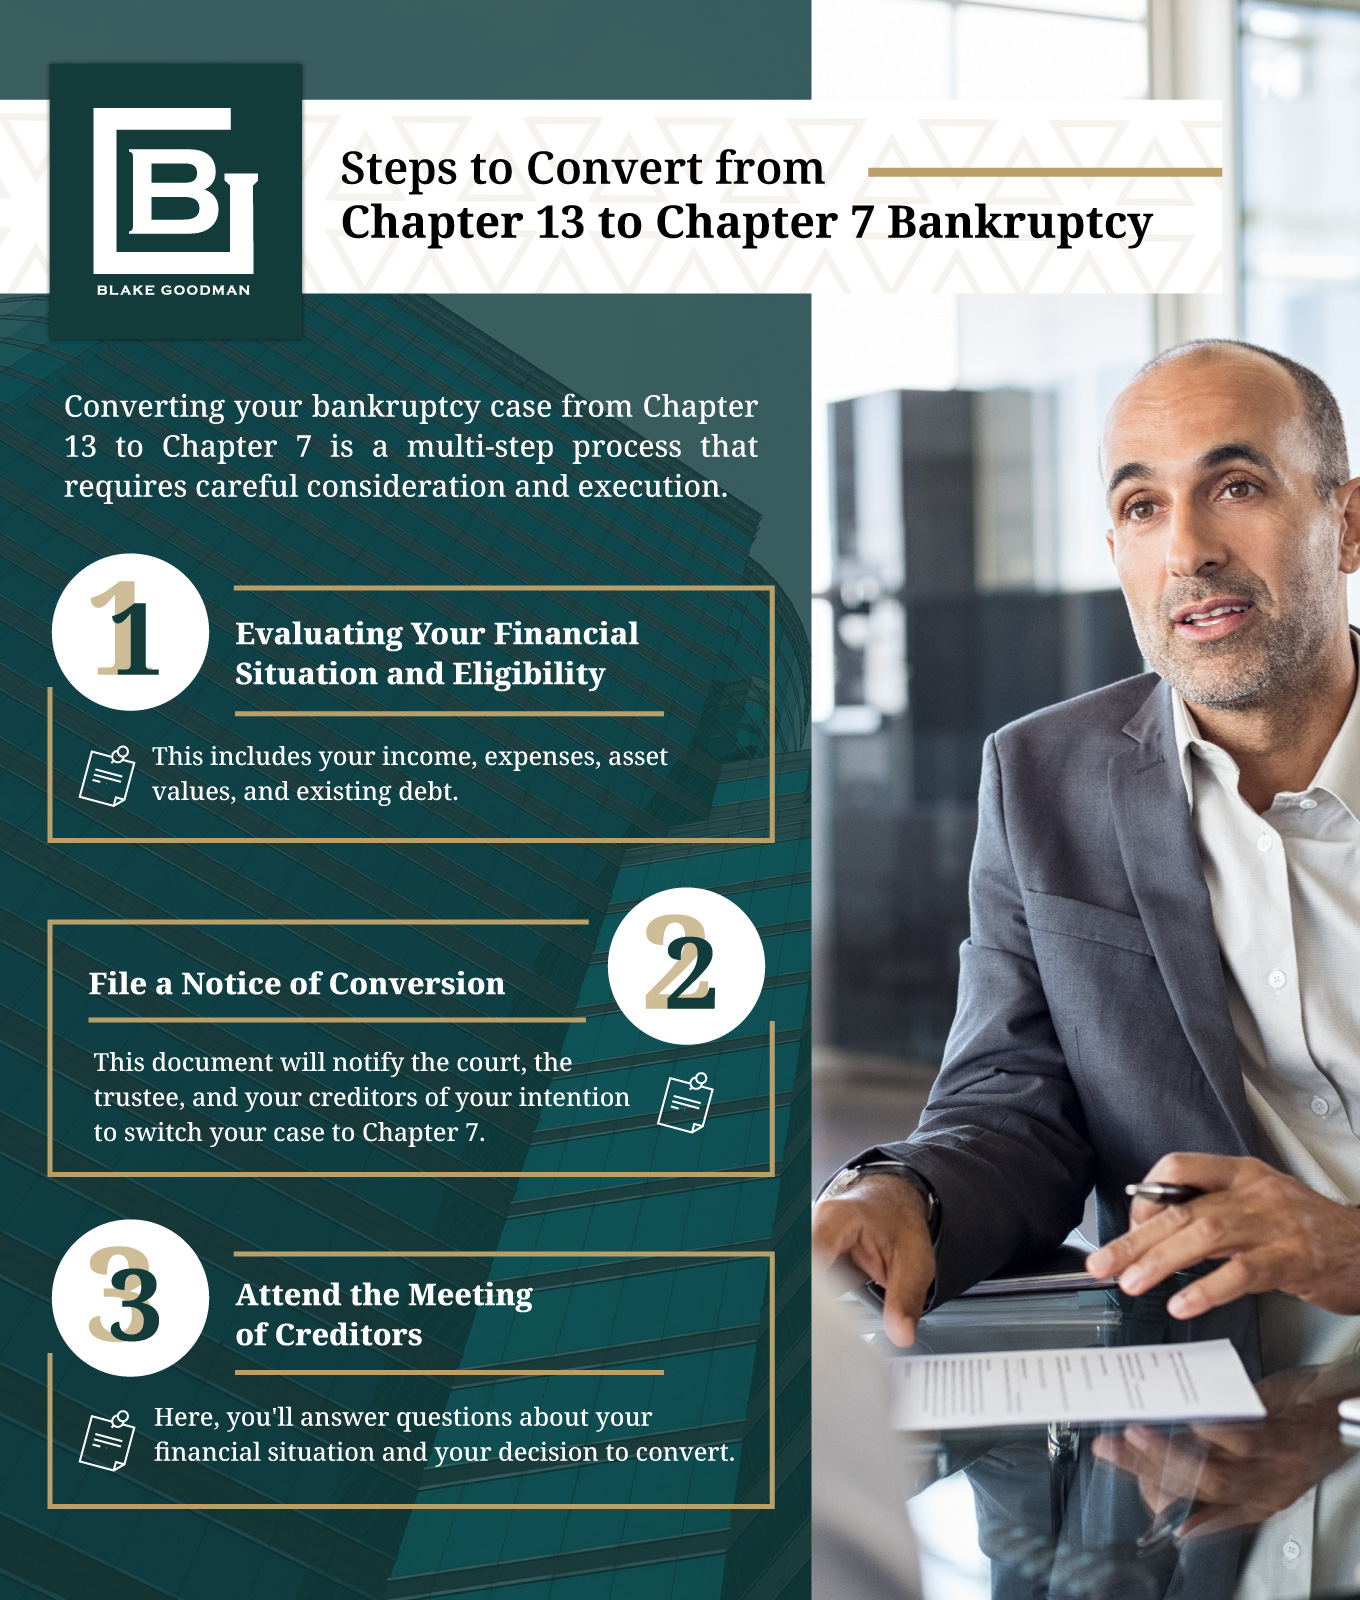 Infographic that shows the steps to convert from chapter 13 to chapter 7 bankruptcy